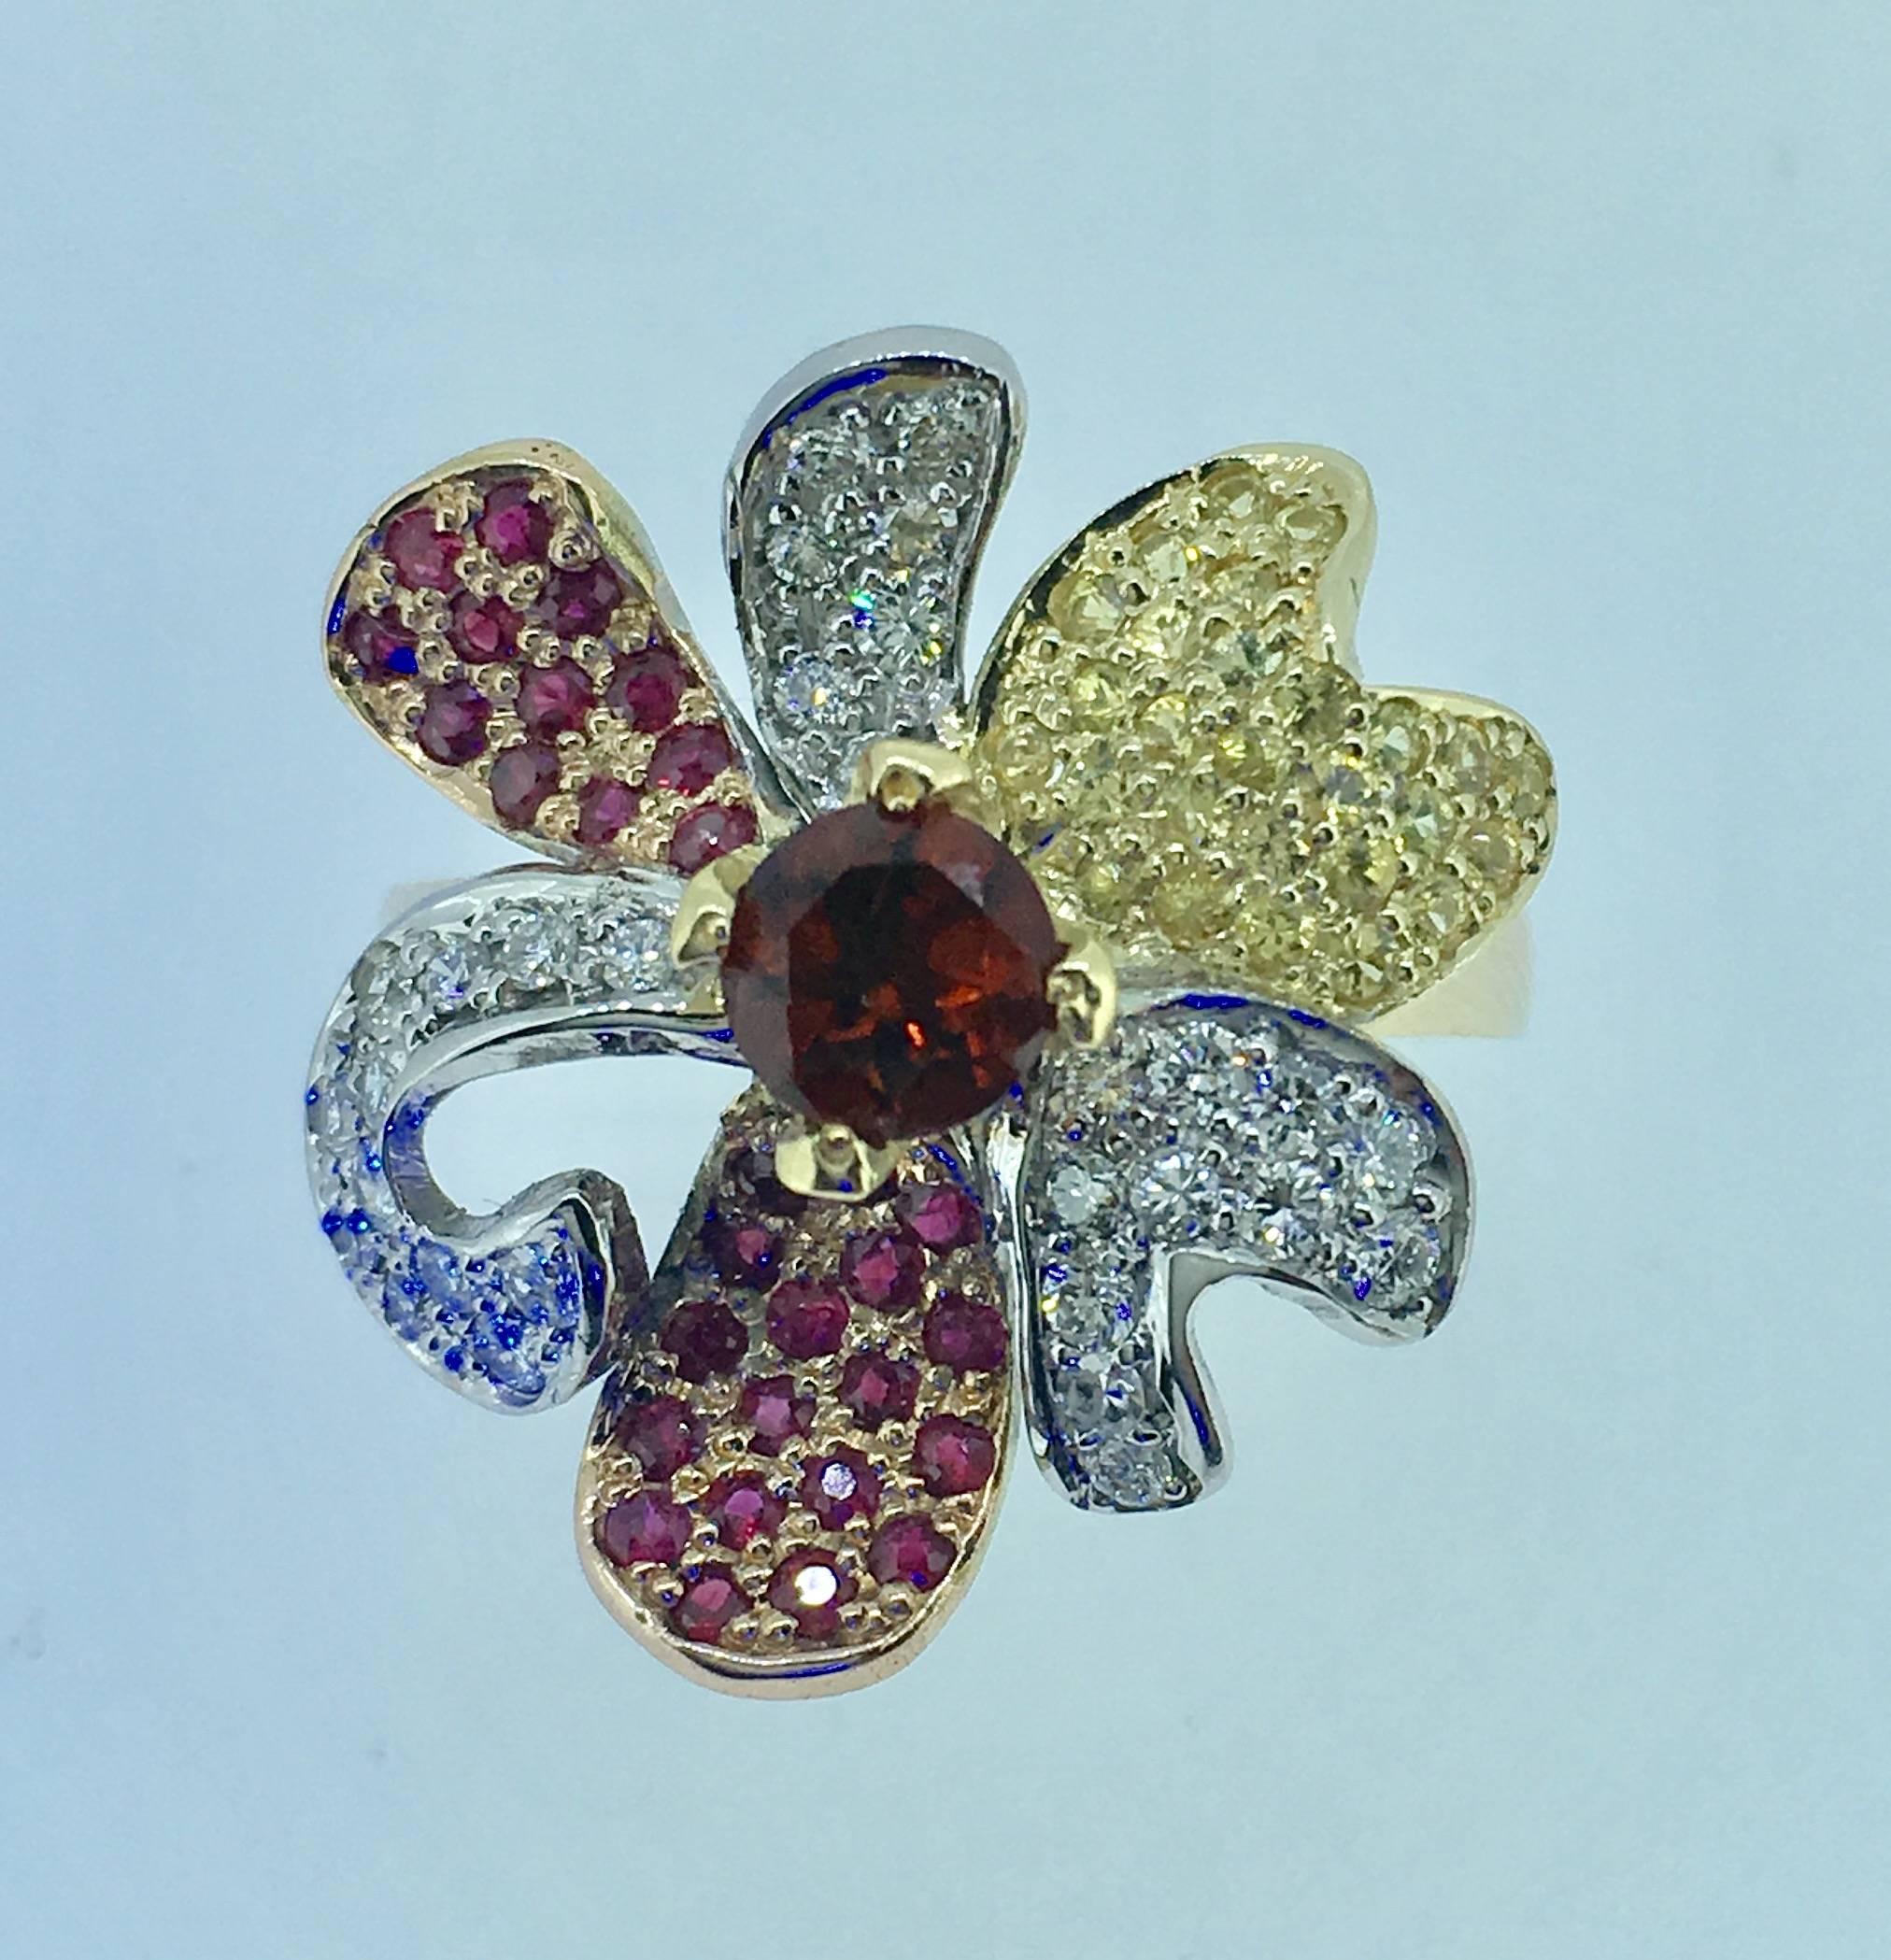 Beautiful Flower shape Romantic ring designed and manufactured by Steven van Giel for Cherubine .
This od rin is flaked with 0.35ct diamonds , 0.70ct yellow and red saphire and 0.5ct rubis .
The piece is signed and made in one examplary 